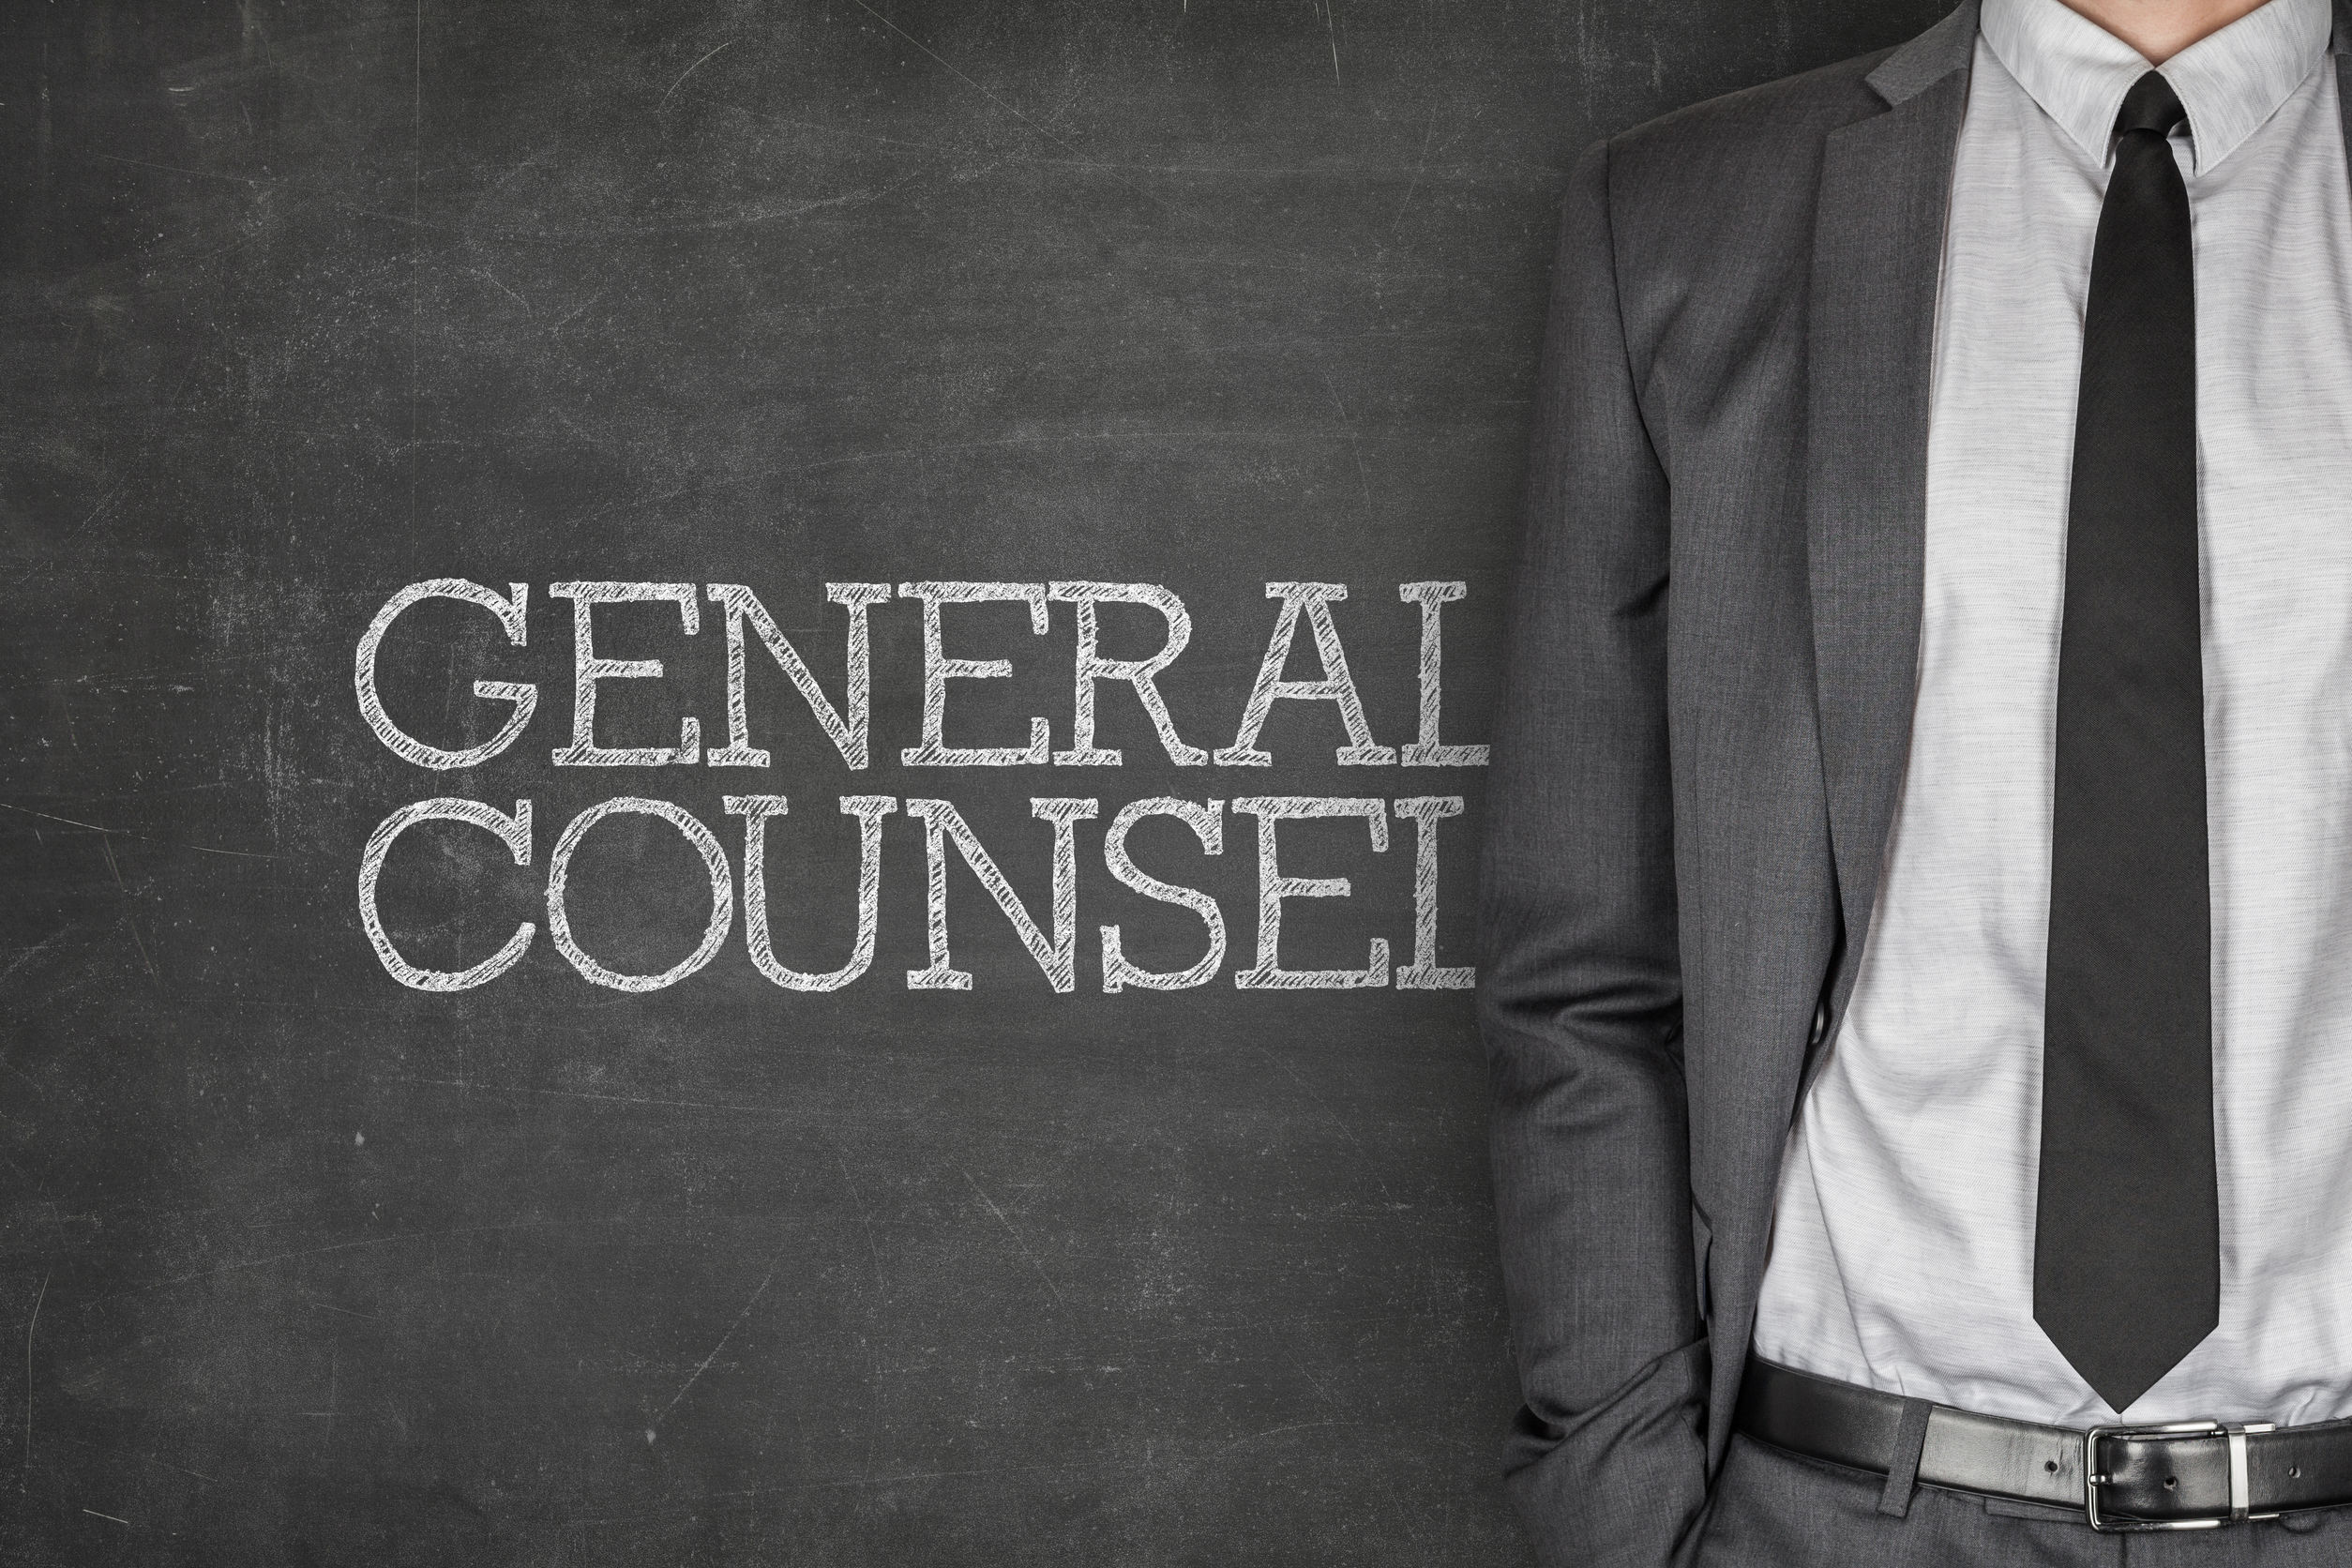 Chatswood General Counsel